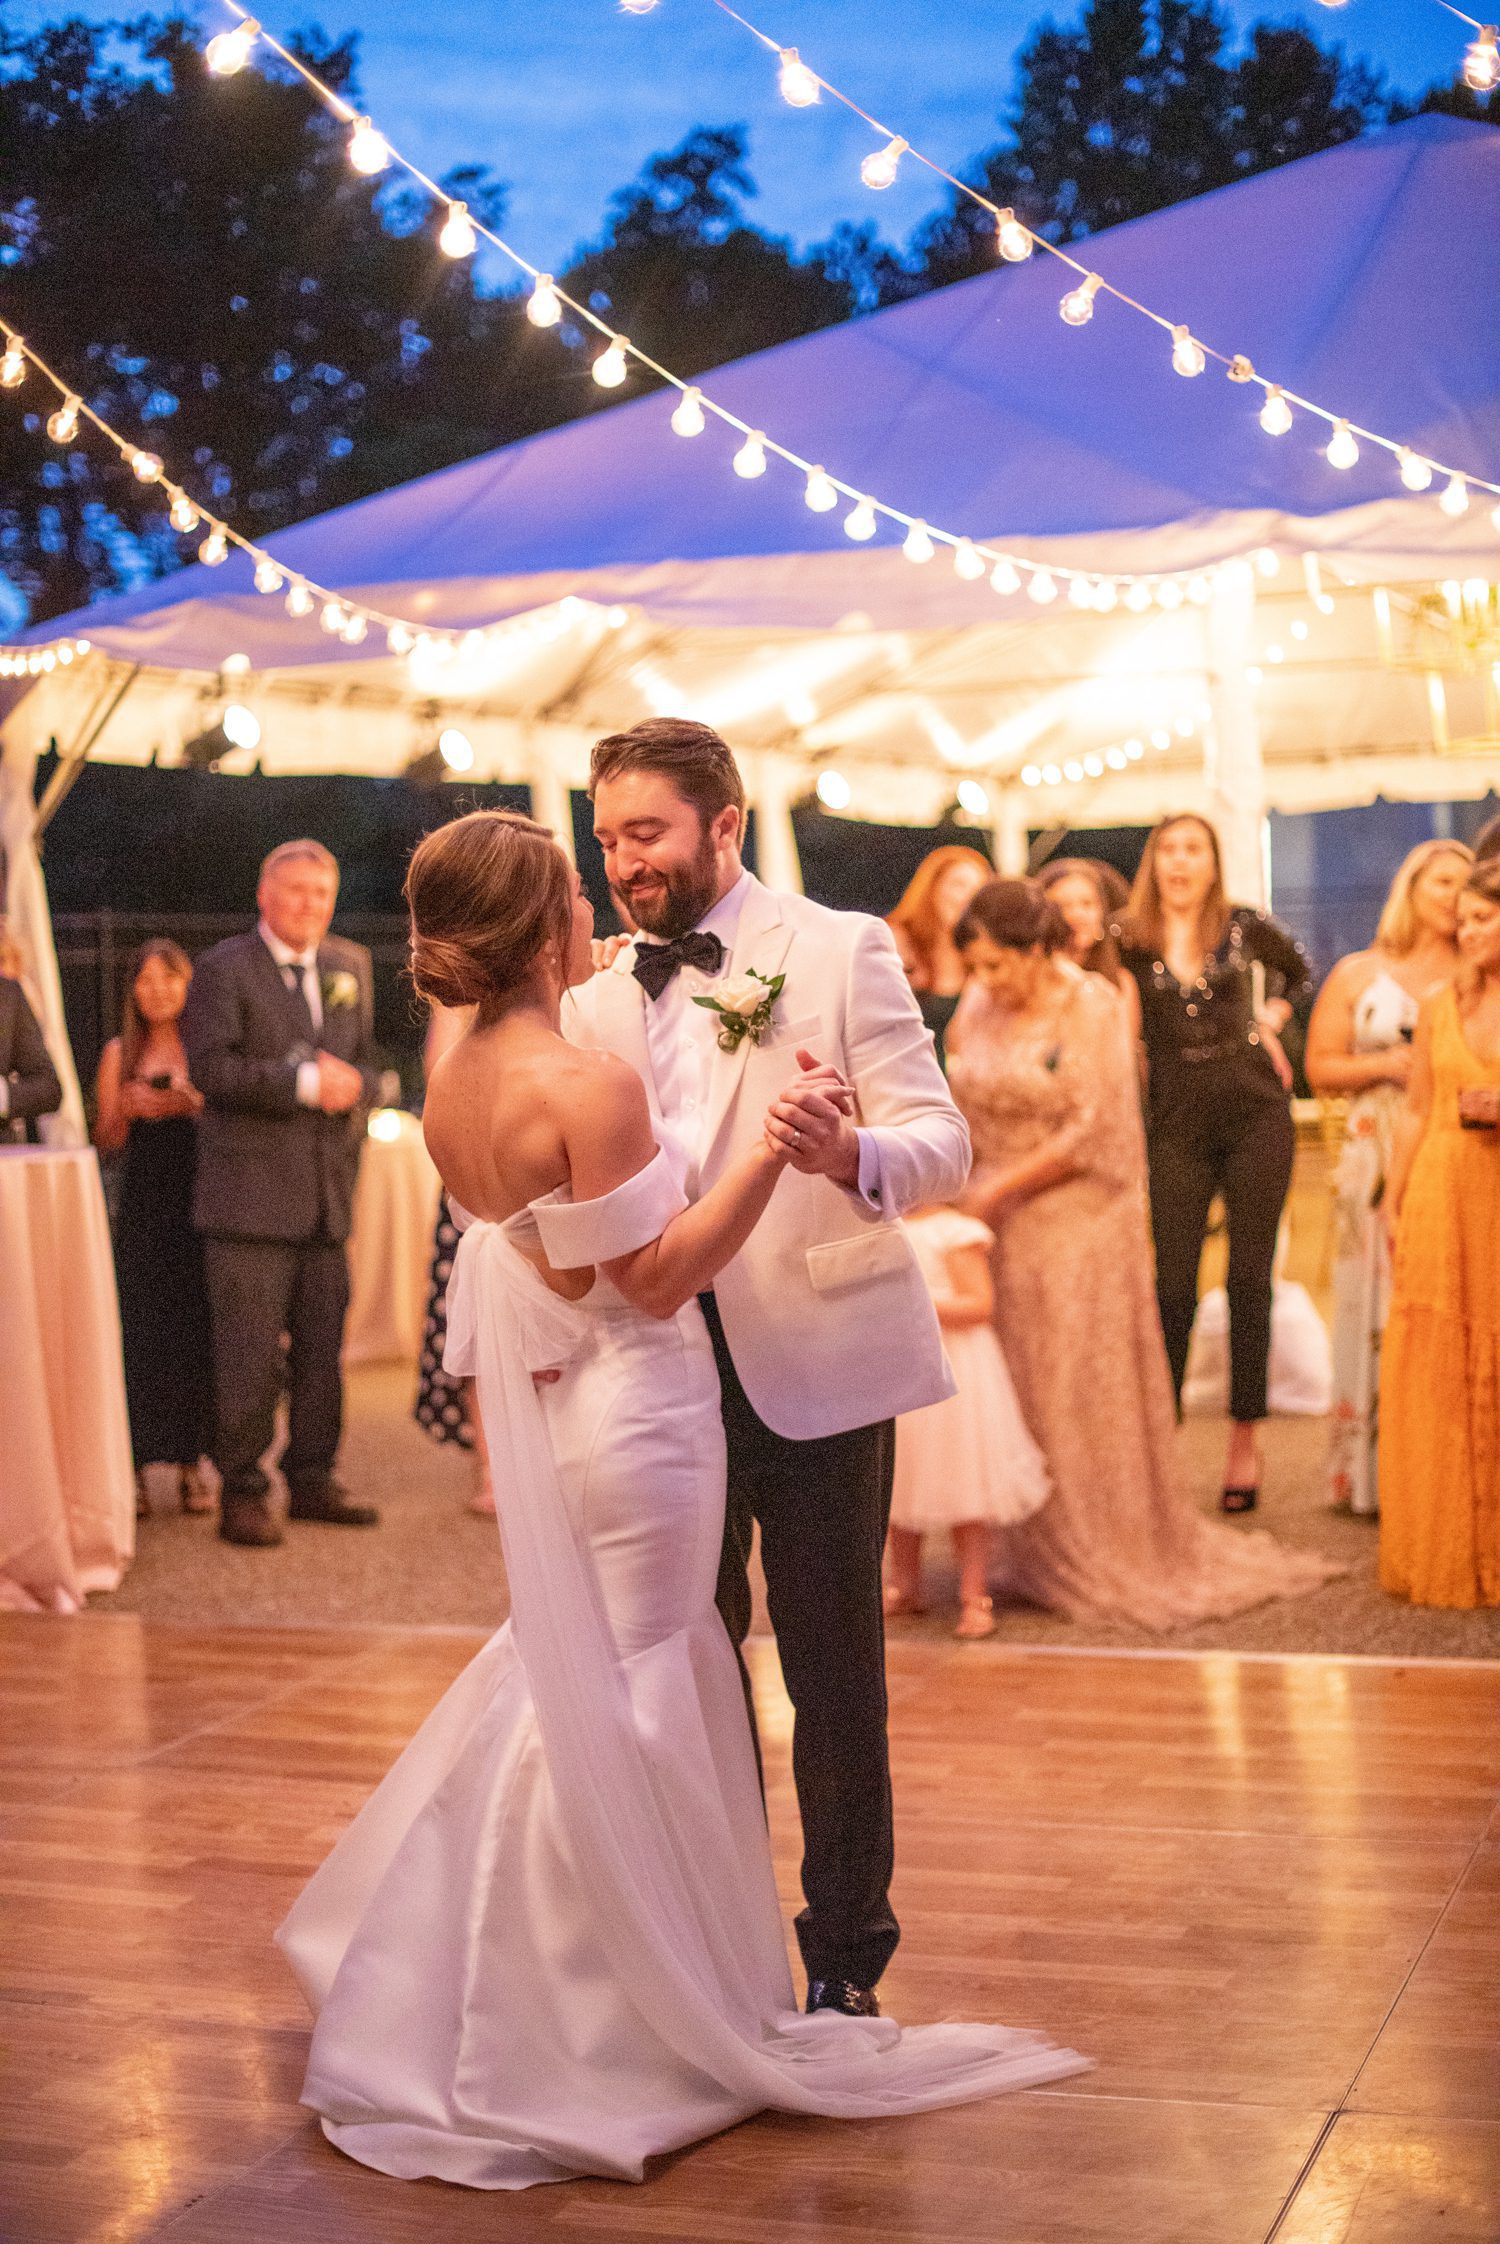 Private Estate Outdoor Wedding Reception Franklin, TN First Dance at Dusk